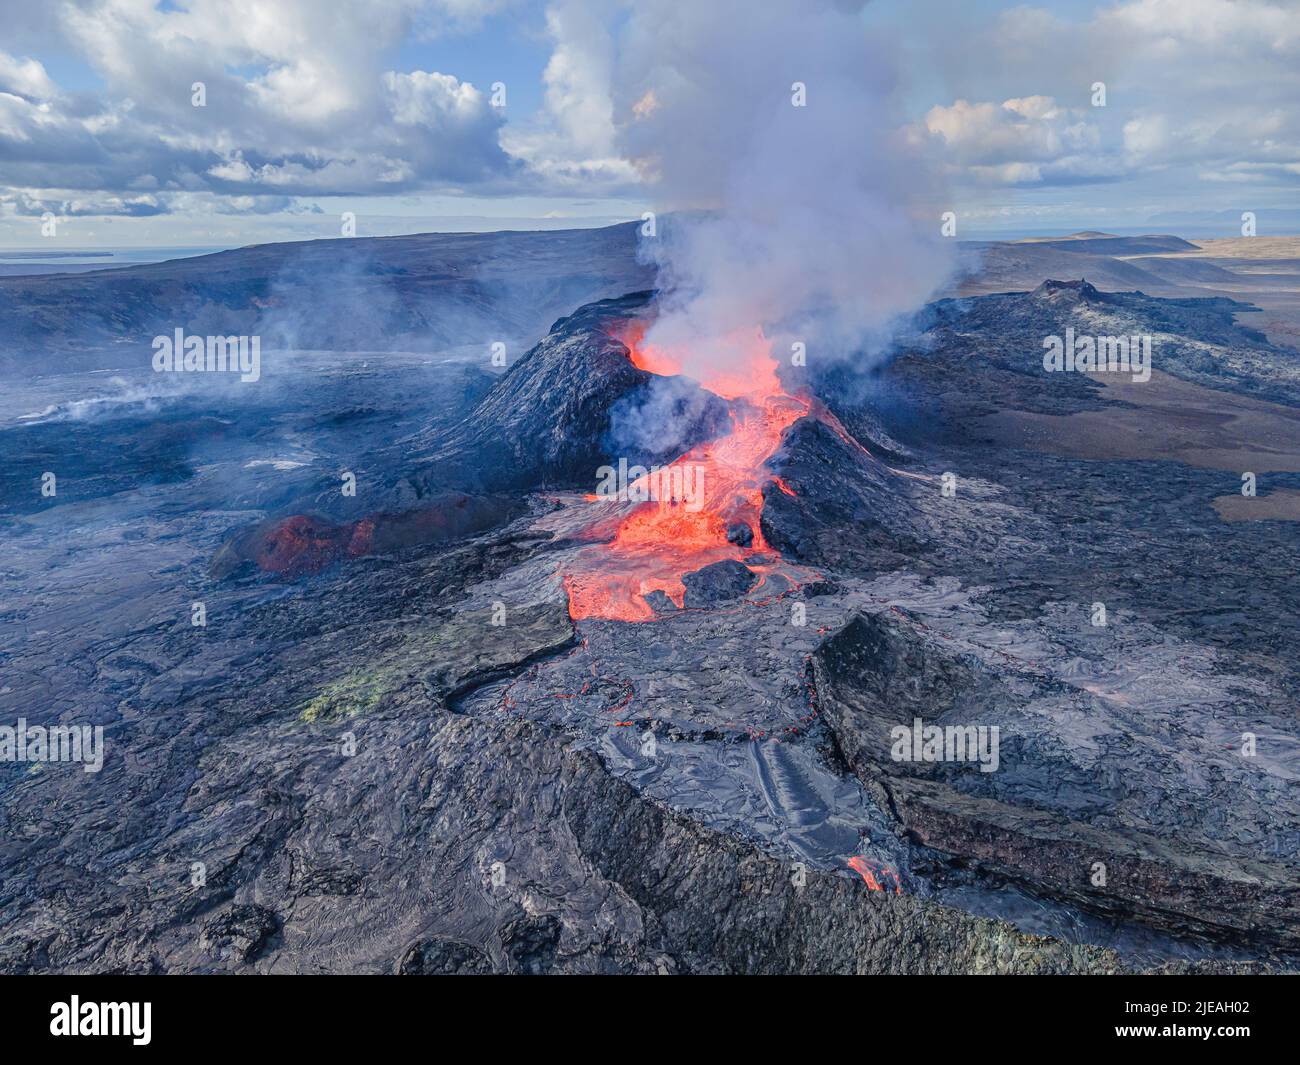 glowing hot lava pouring out of a volcano in Iceland. View into the crater of the Reykjanes Peninsula from above. Steam and smoke near the crater. Stock Photo